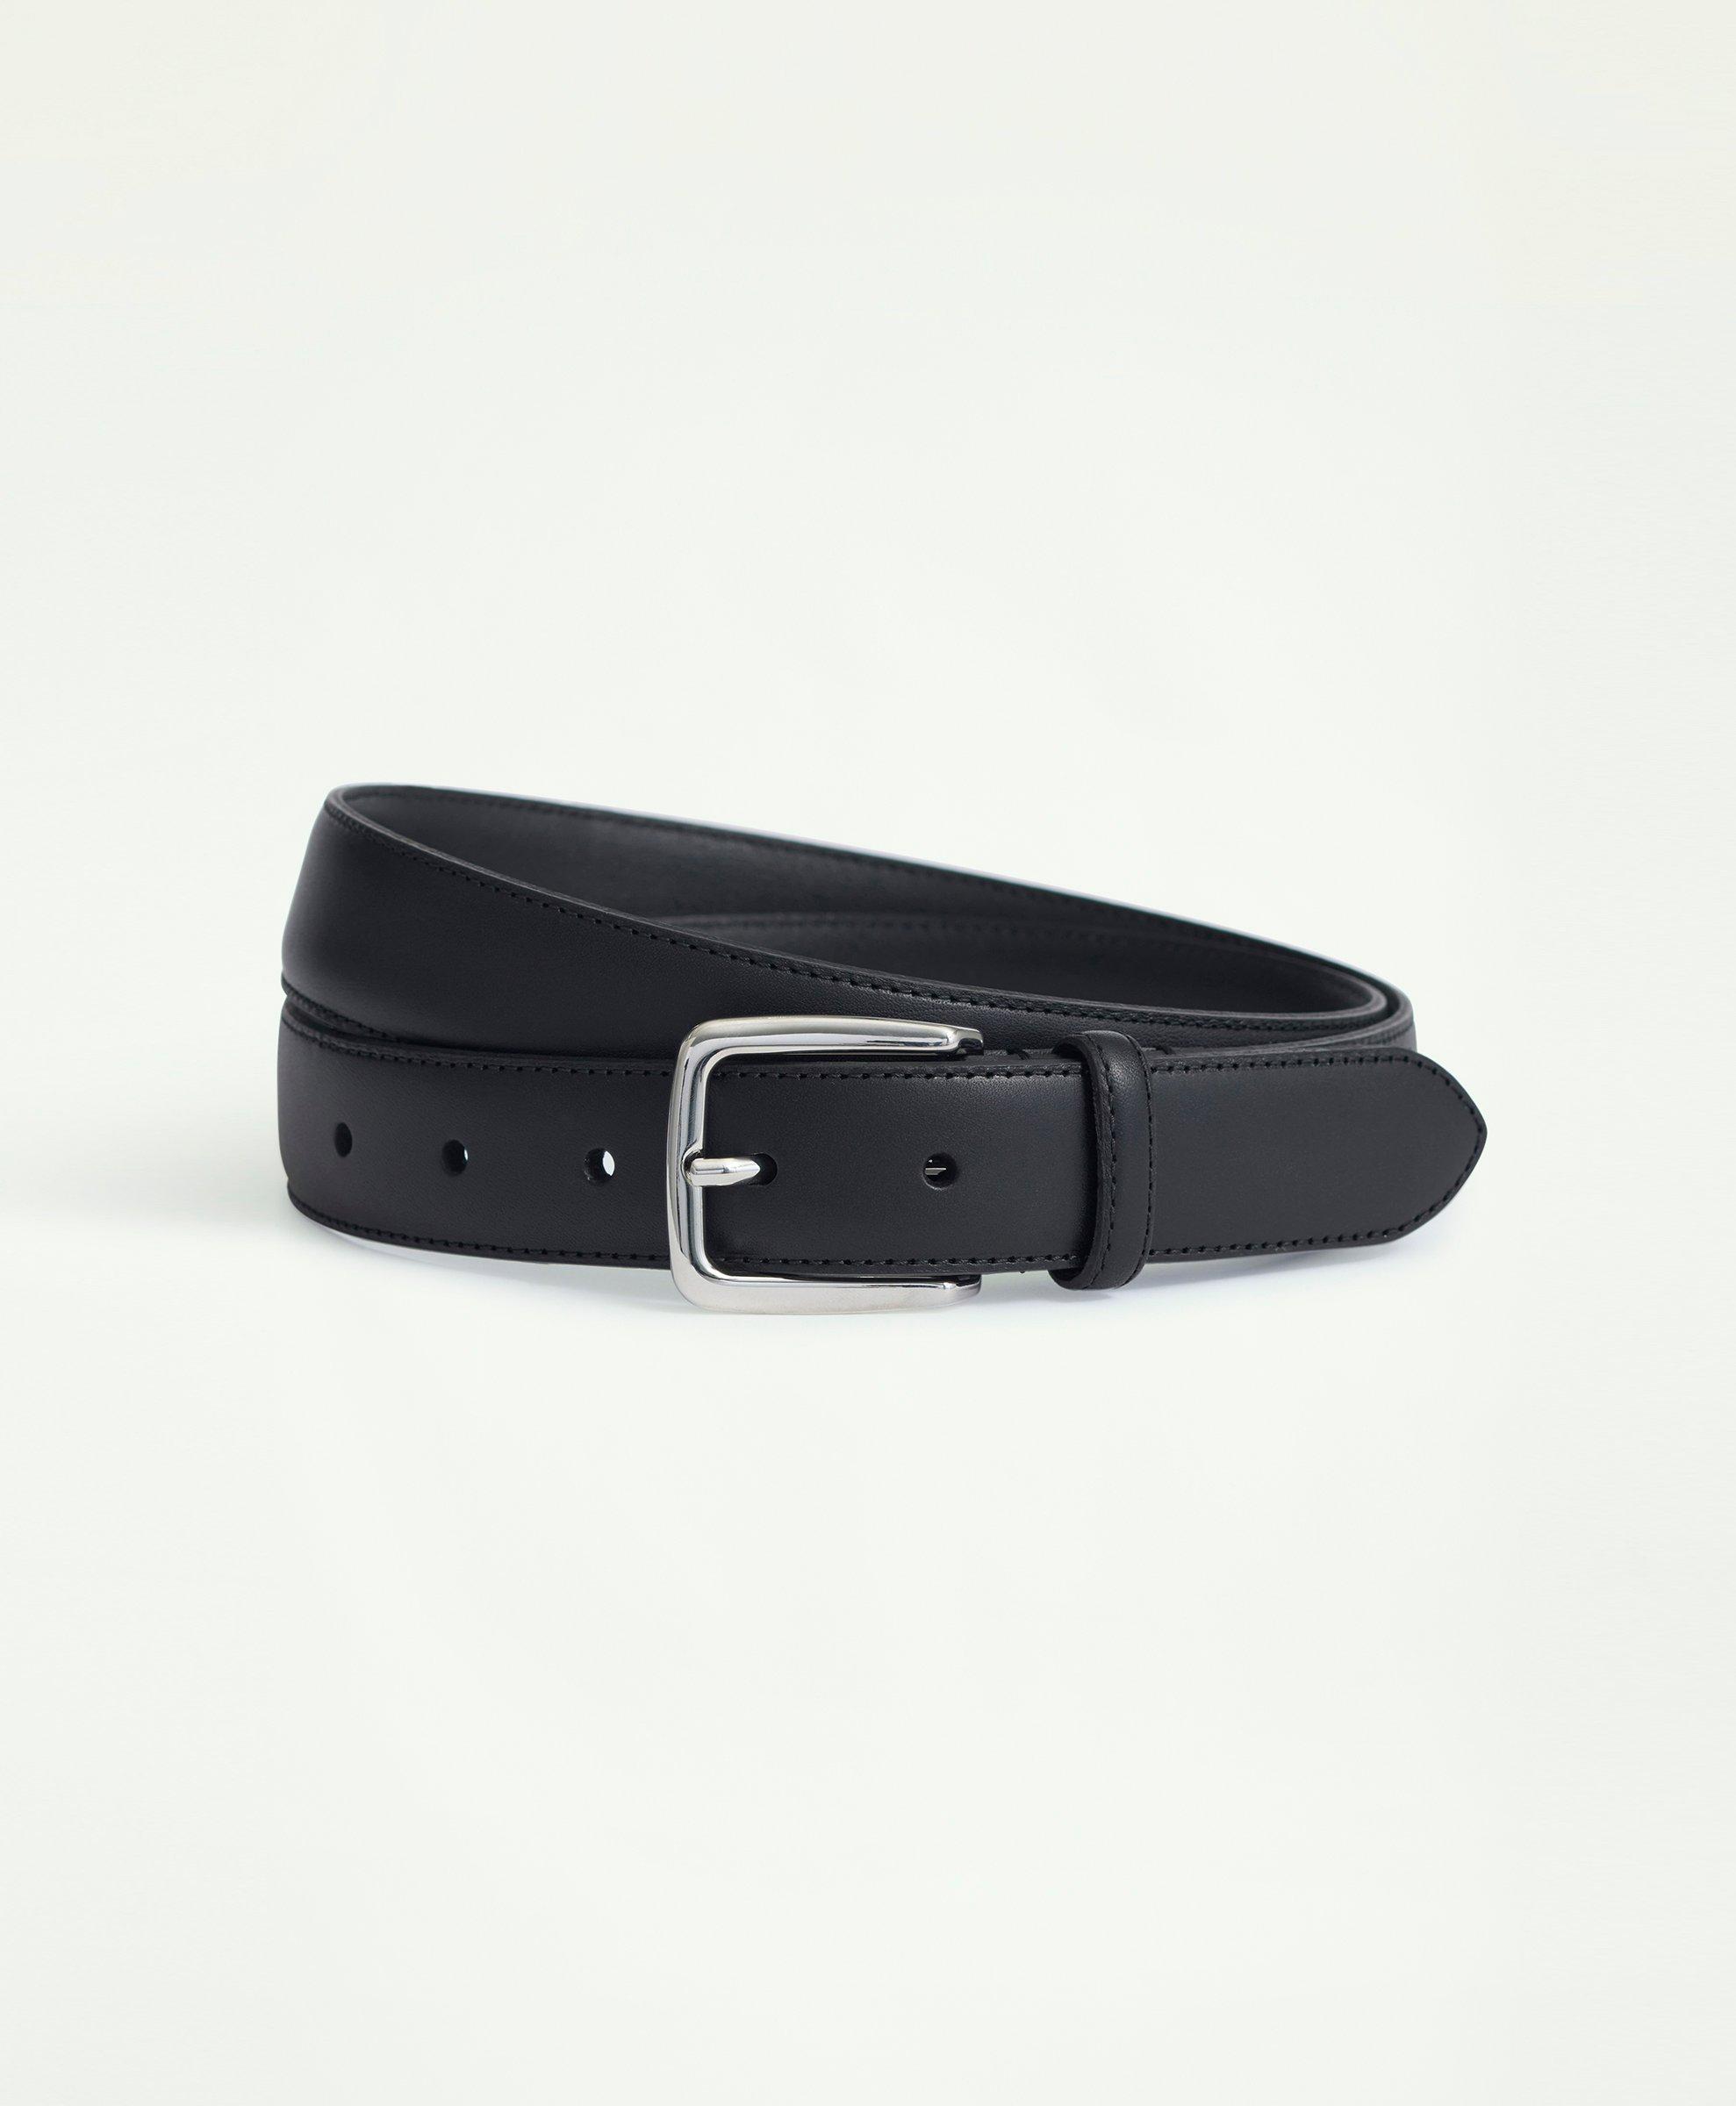 Brooks Brothers Woven Leather Stretch Belt, $188, Brooks Brothers